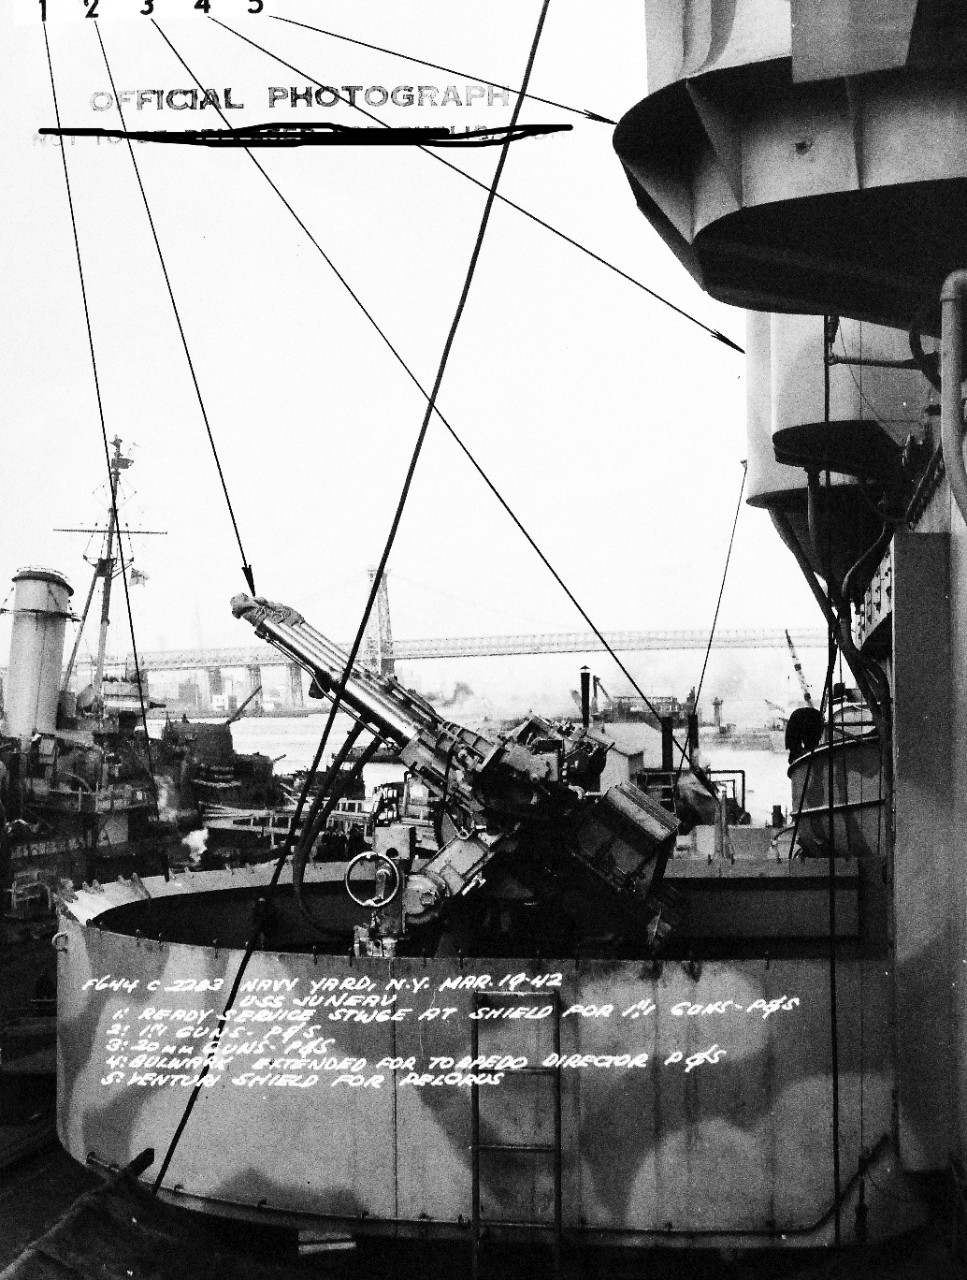 19-LCM-31283:   USS Juneau (CL-52) , March 1942.   Light cruiser at the New York (also known as Brooklyn) Navy Yard, New York City, New York, March 19, 1942.   U.S. Bureau of Ships Photograph, now in the collections of the National Archives.  (2015/02/18). 